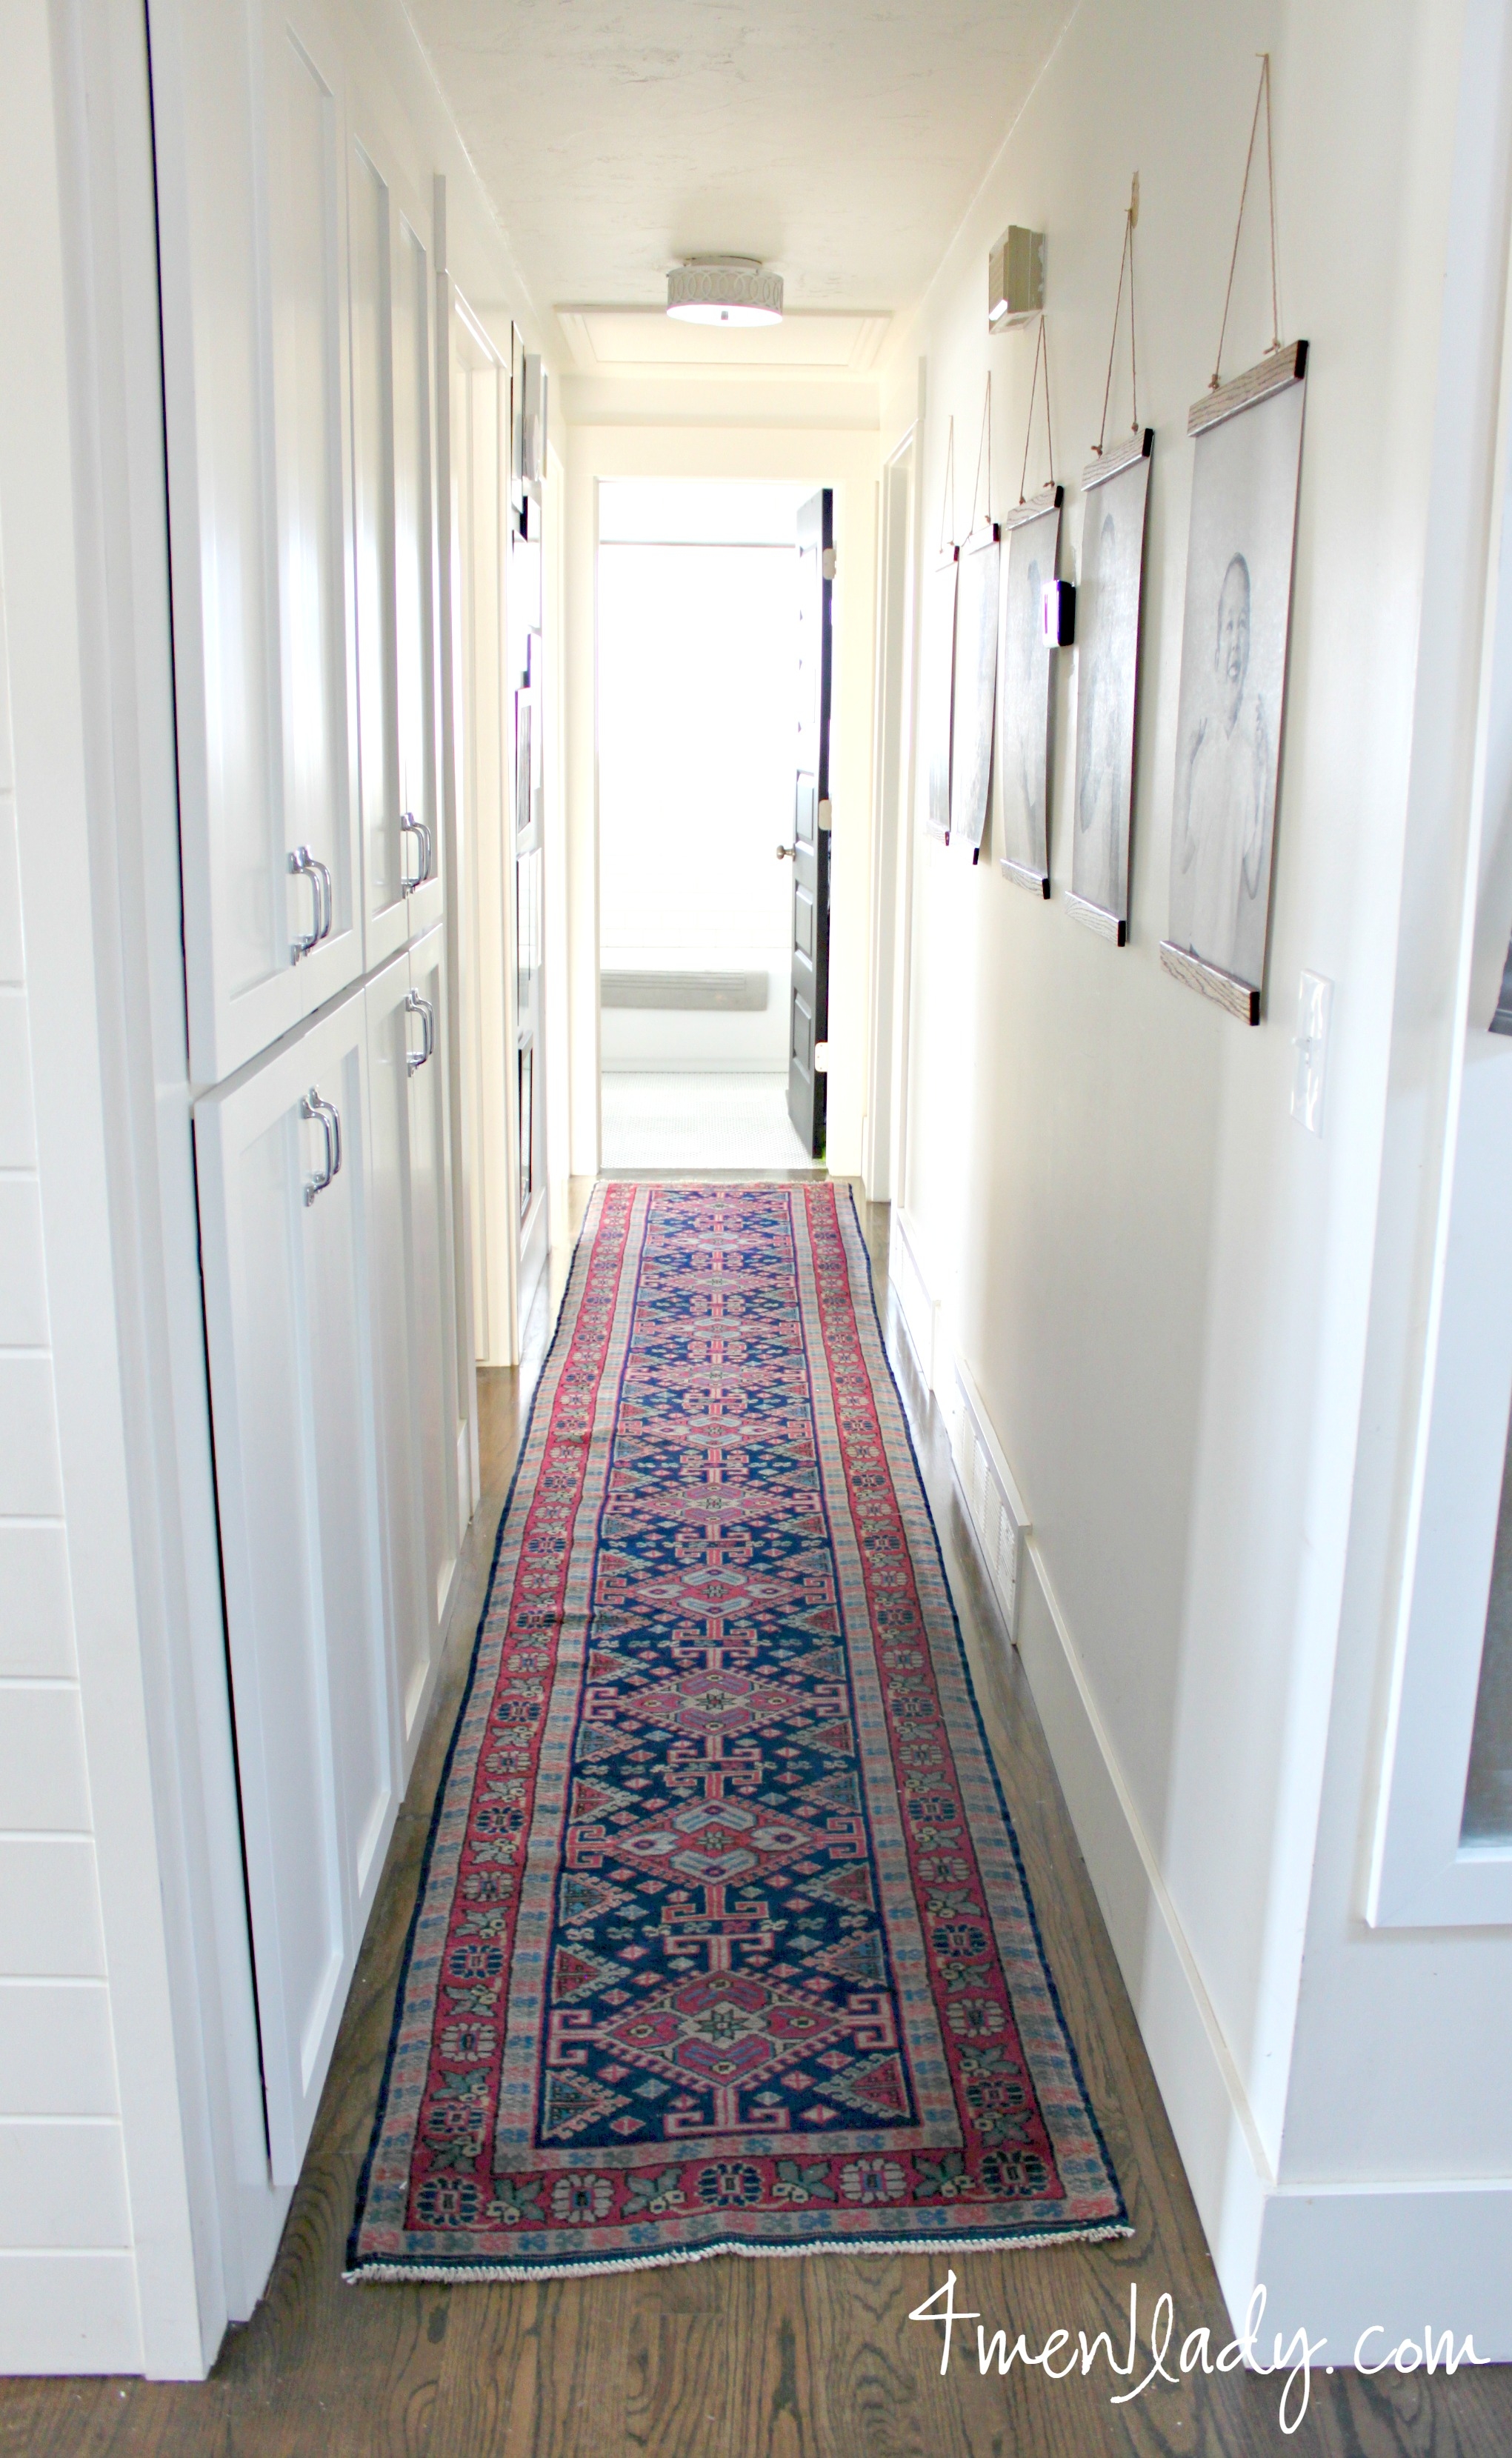 Hall Runners Extra Long Visualhunt, Runner Rugs For Hallways